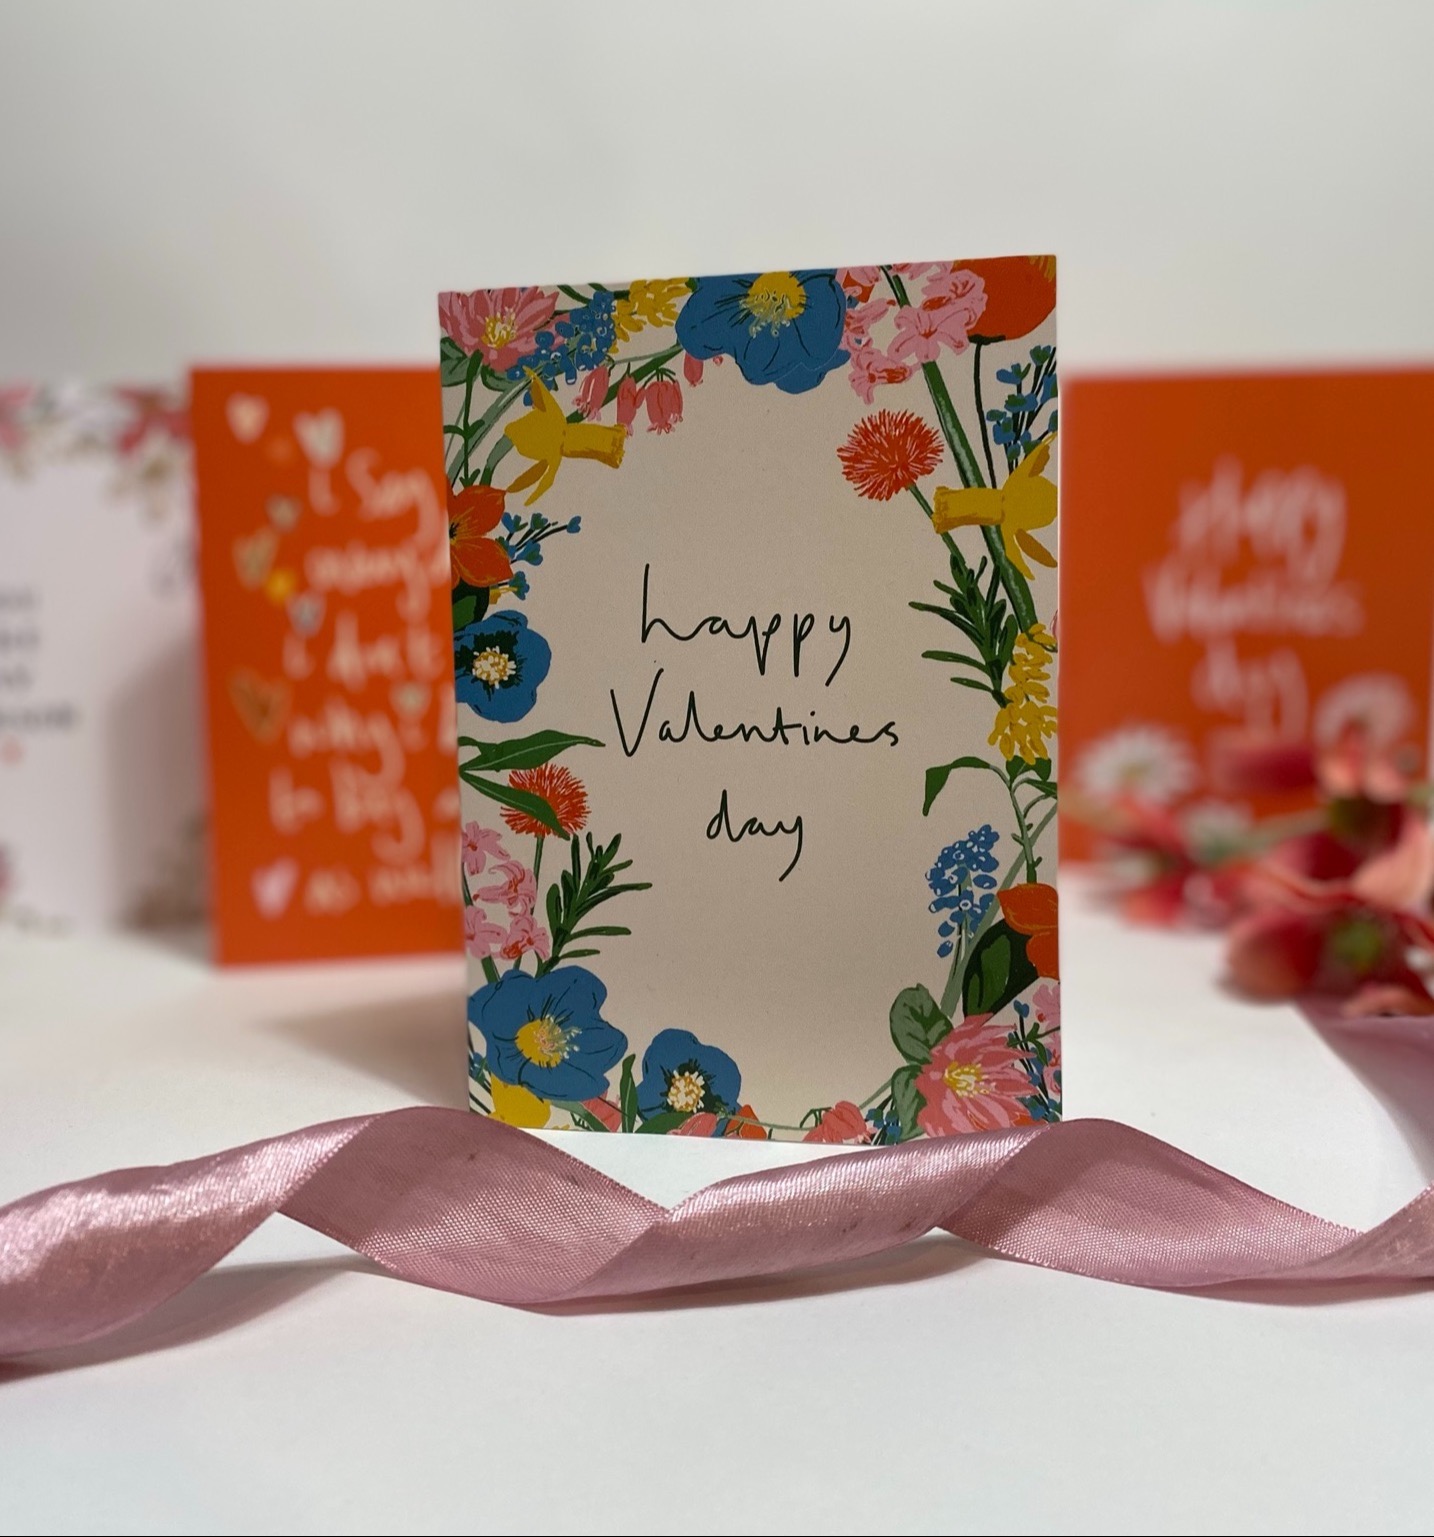 Happy Valentine’s Day greetings card with FREE biodegradable heart tissue confetti inside LMV007